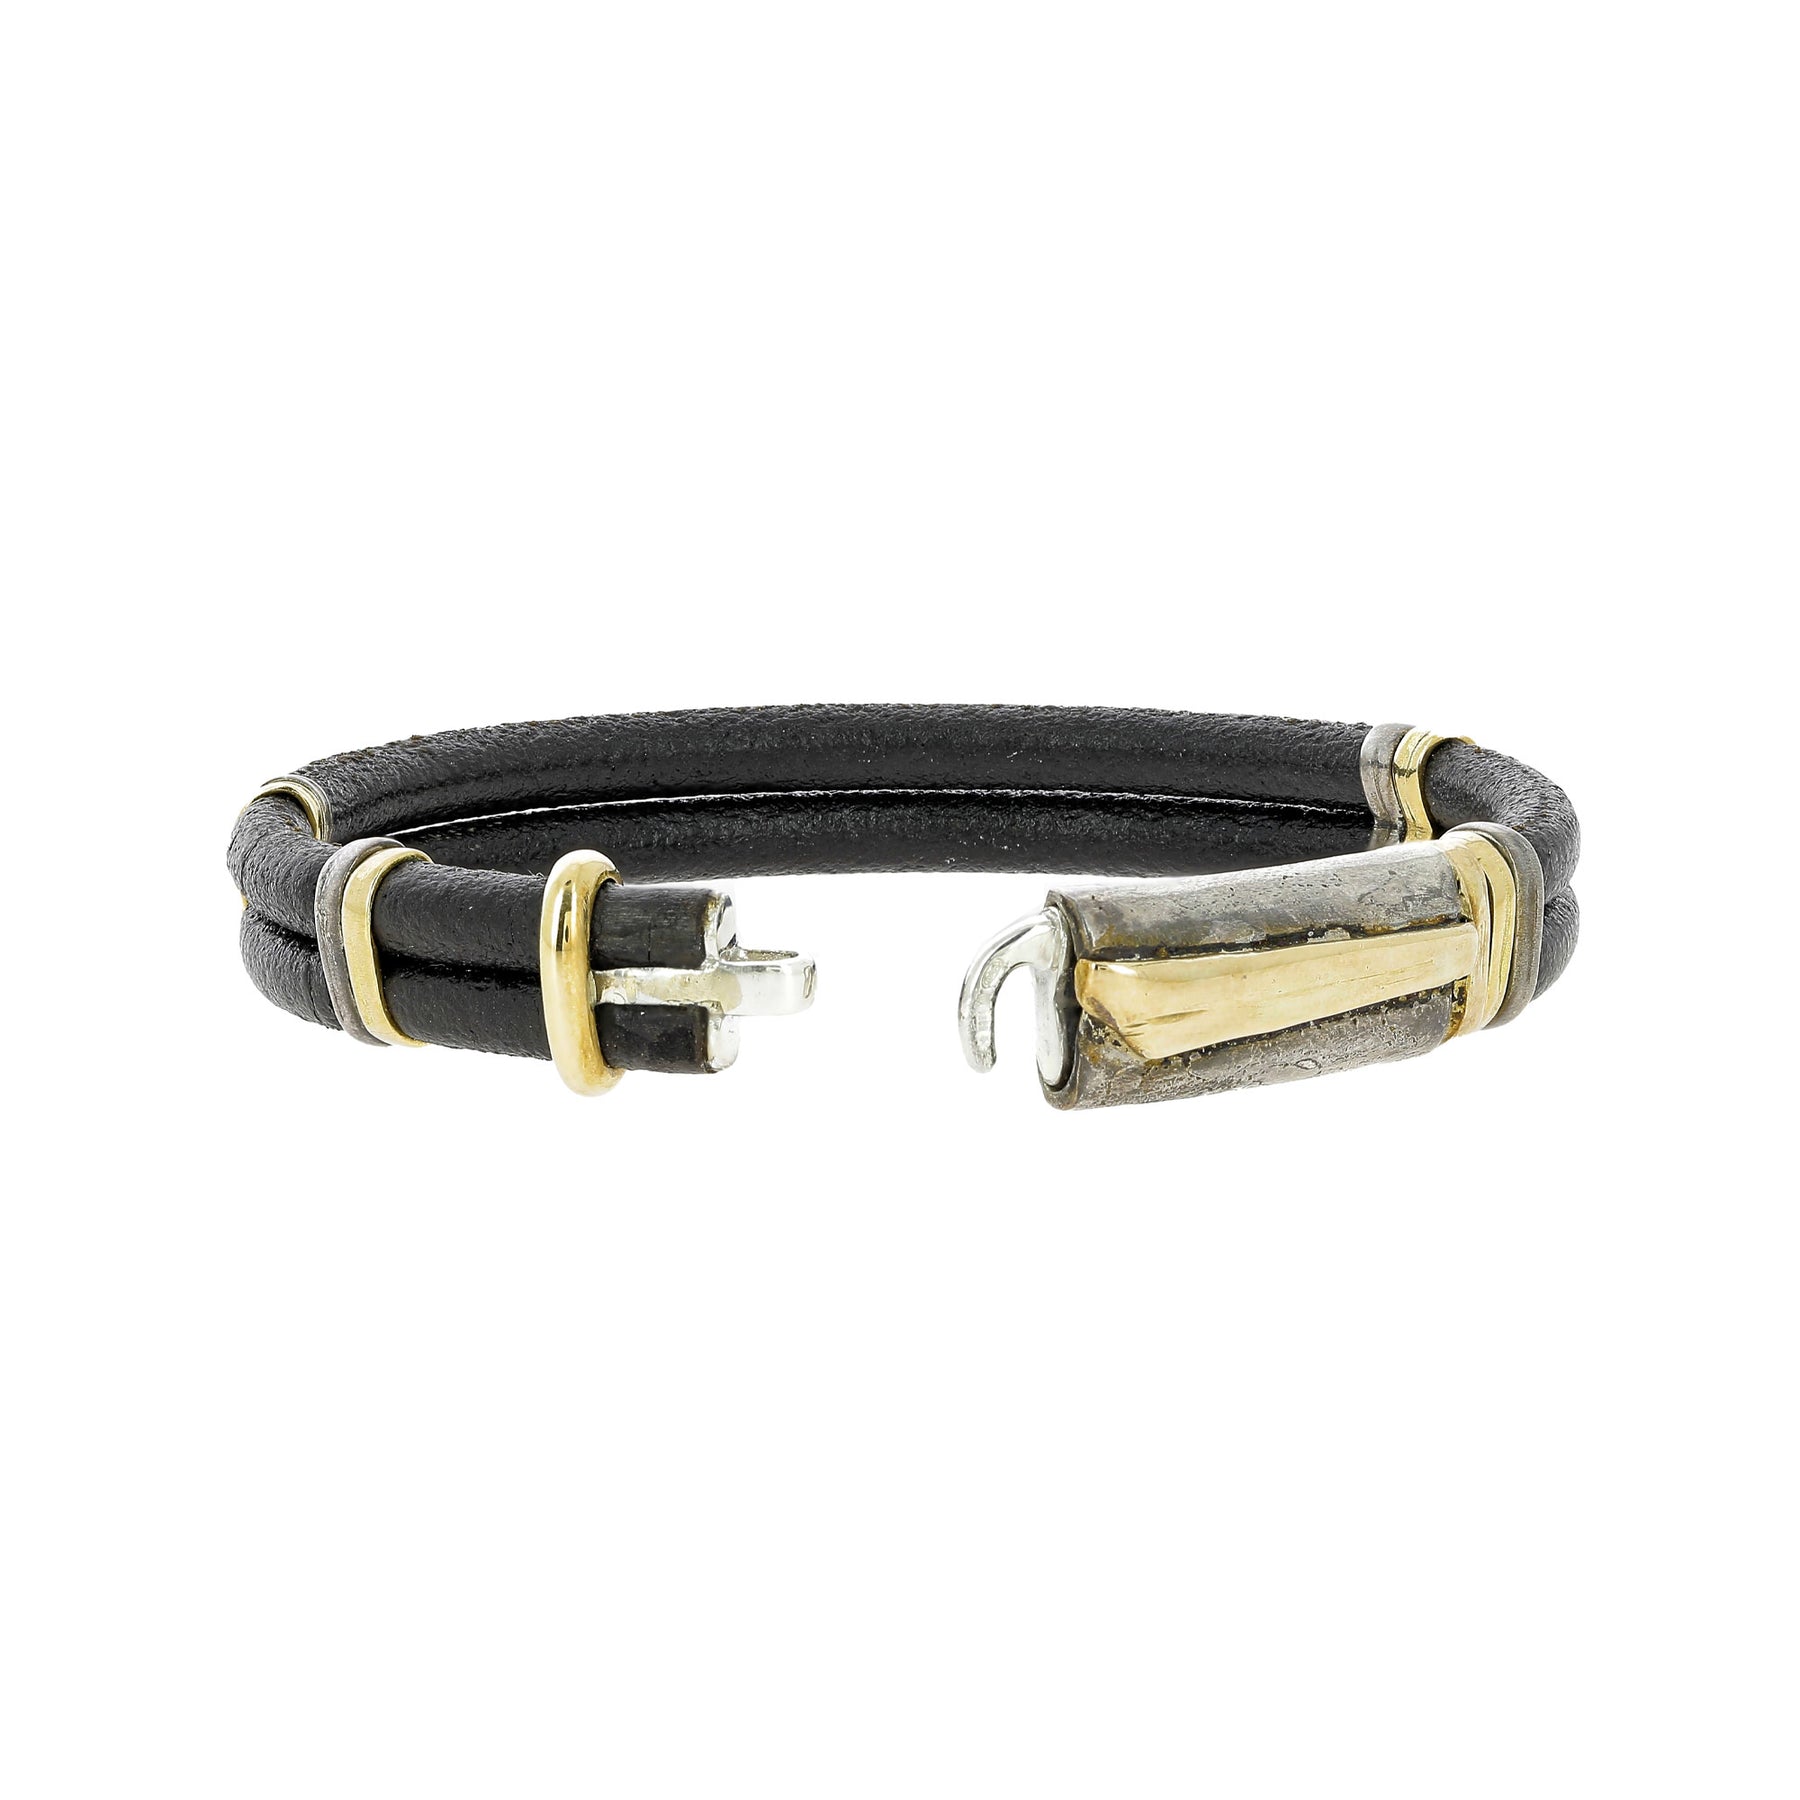 Misani 5mm Leather with Gold & Silver Bracelet